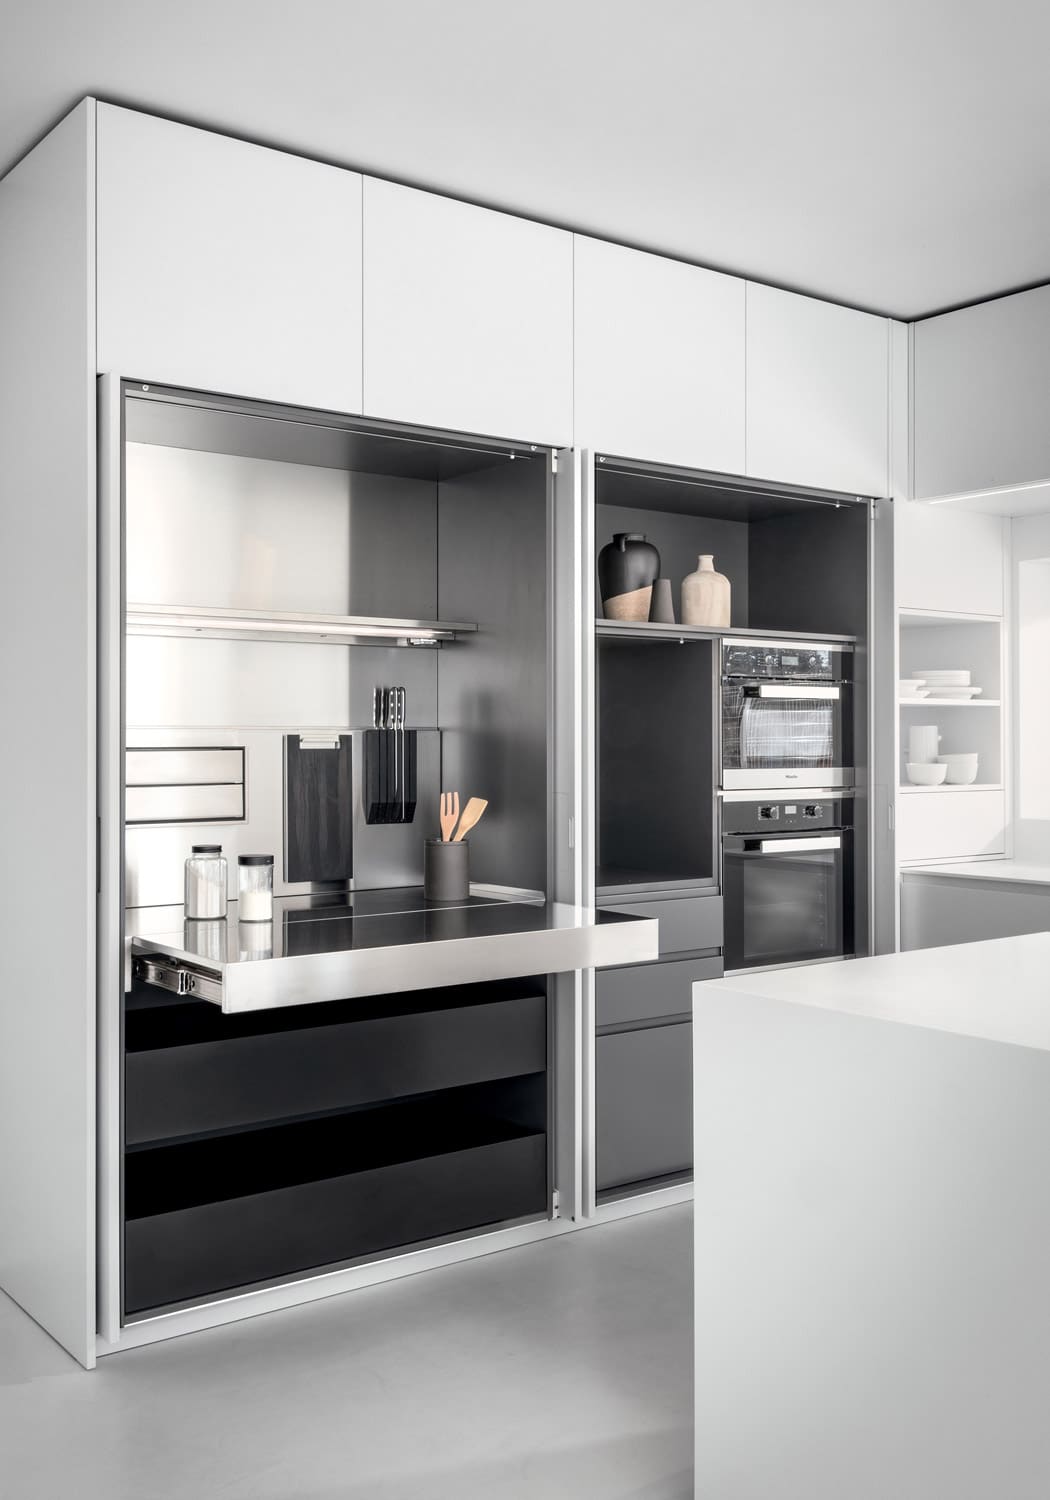 The left unit was personalized with drawers, a wall equipped to store accessories and a full pull-out worktop in stainless steel to extend the usable surface area of the kitchen.